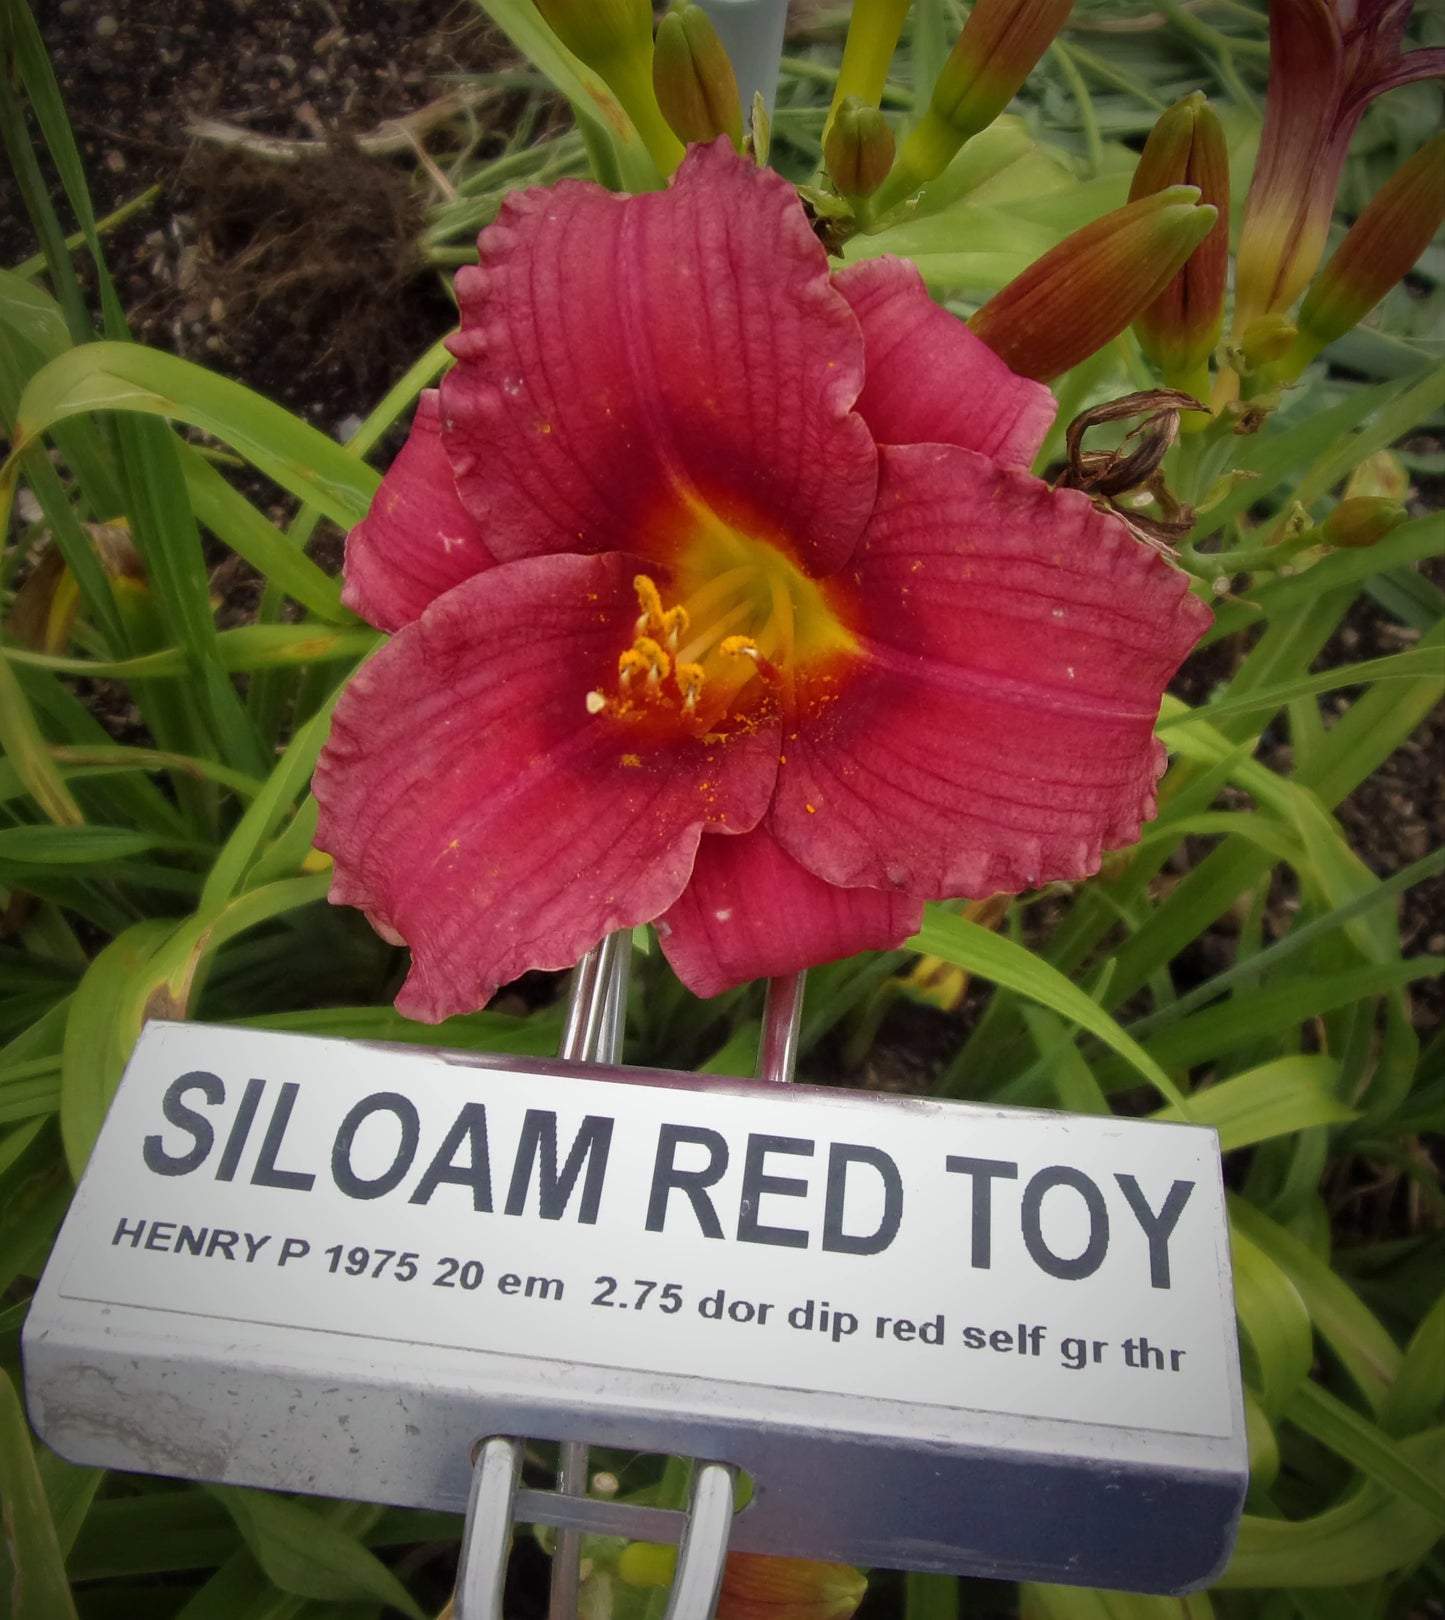 SILOAM RED TOY